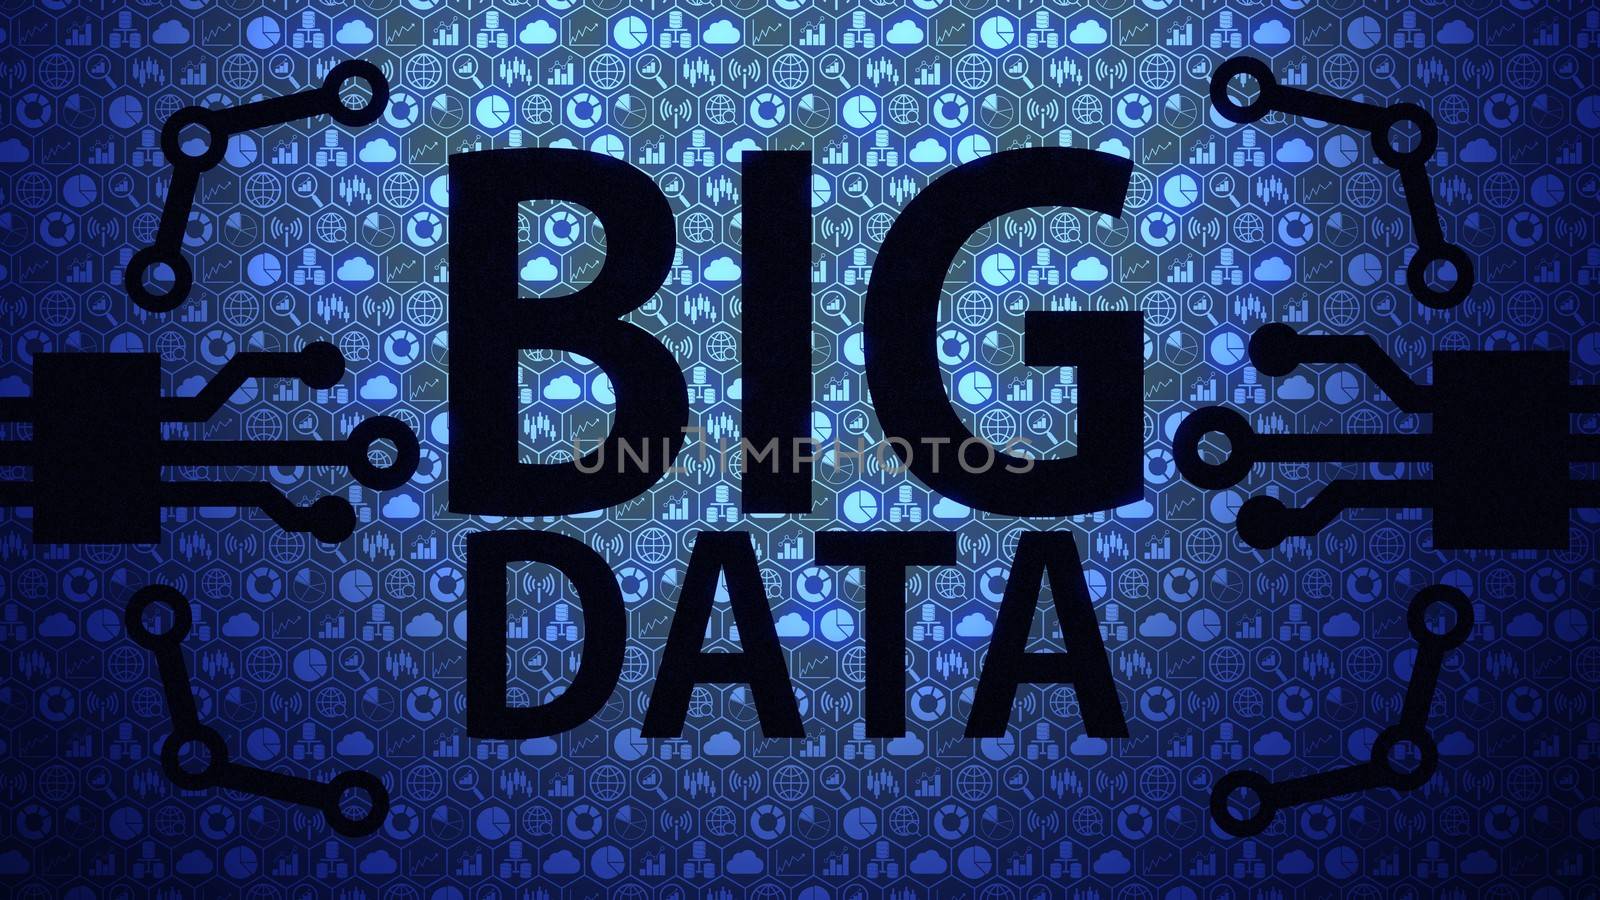 Big Data Big Picture Background Composed of Big Data Icons and Big Data Text with Blue Light Ver.1 of 4 (Full Screen)